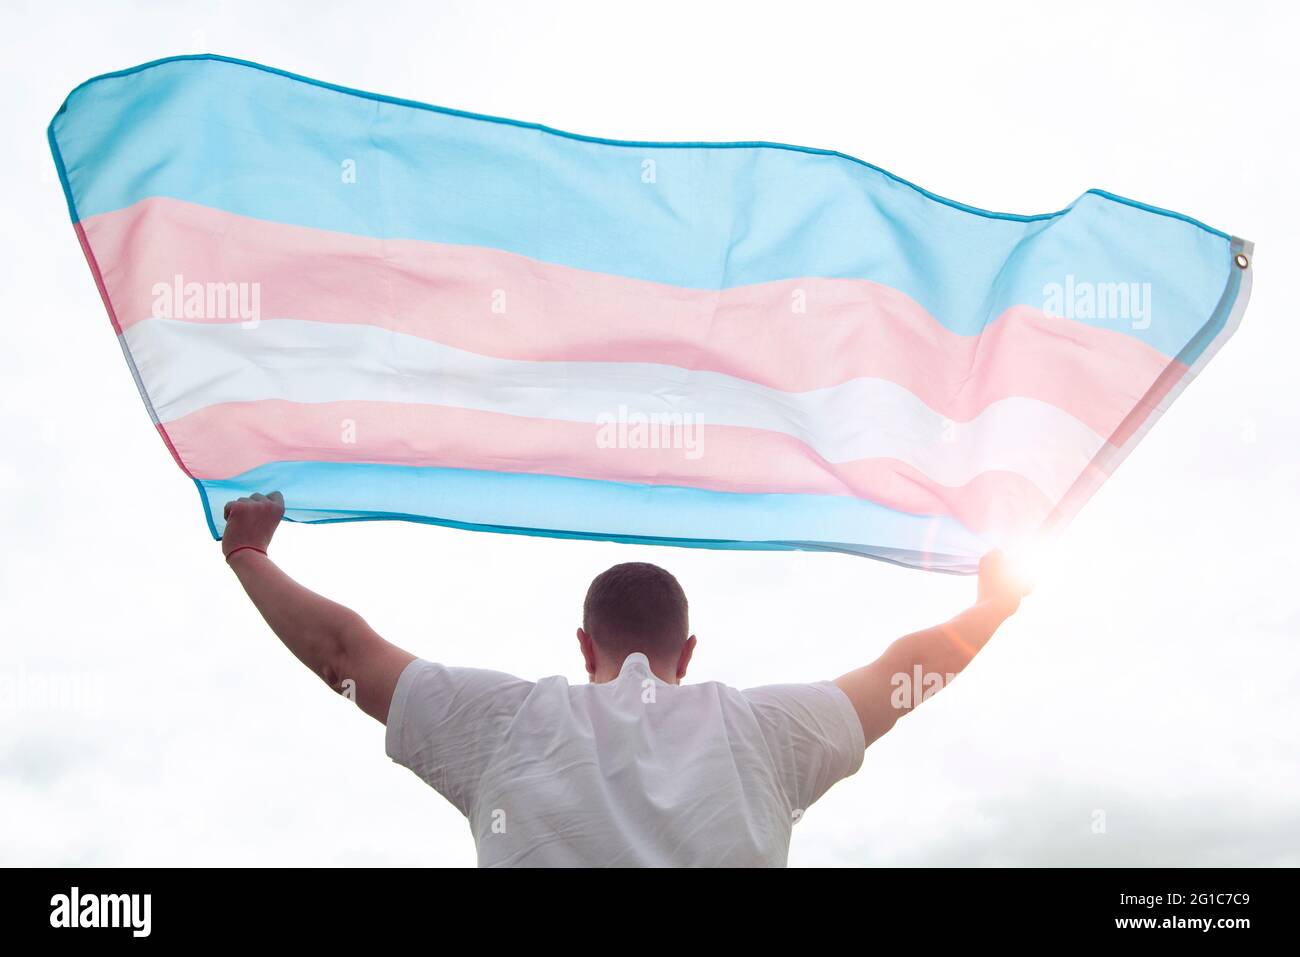 Transgender man holding waving transgender flag, concept picture about human rights, equality in the World Stock Photo